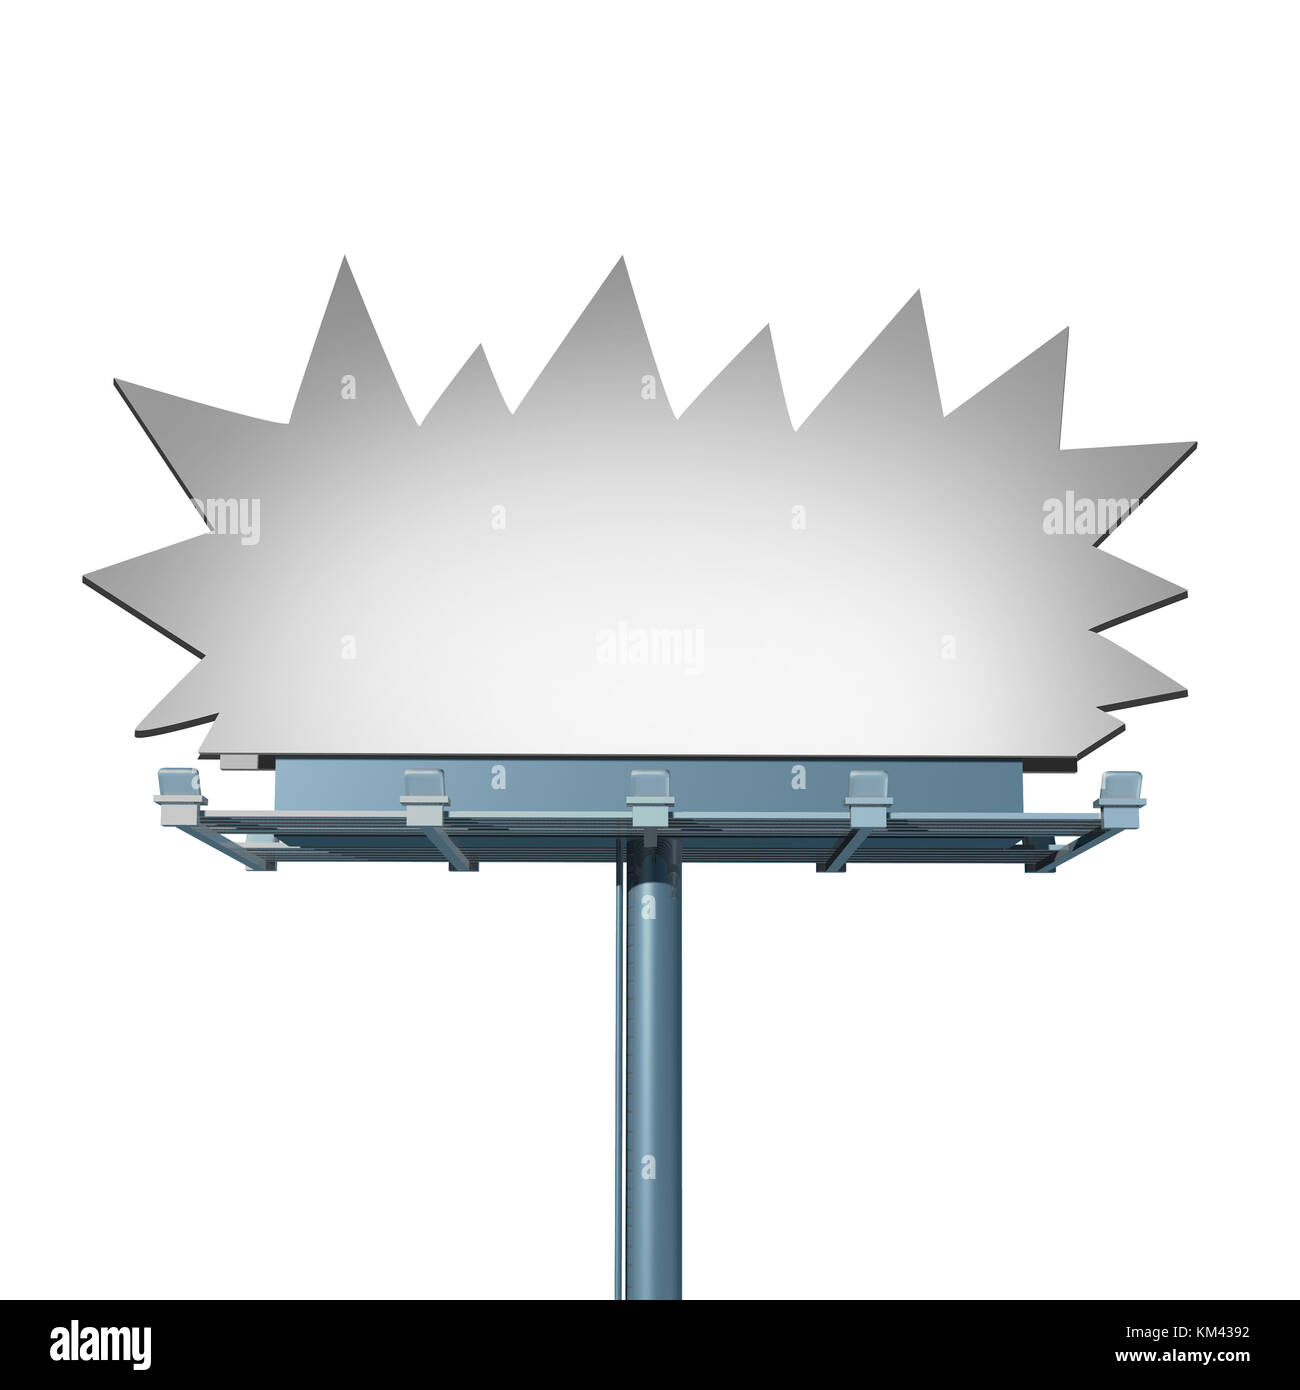 Blank starburst billboard as an advertising and marketing sign with text area promoting a message as a 3D render. Stock Photo